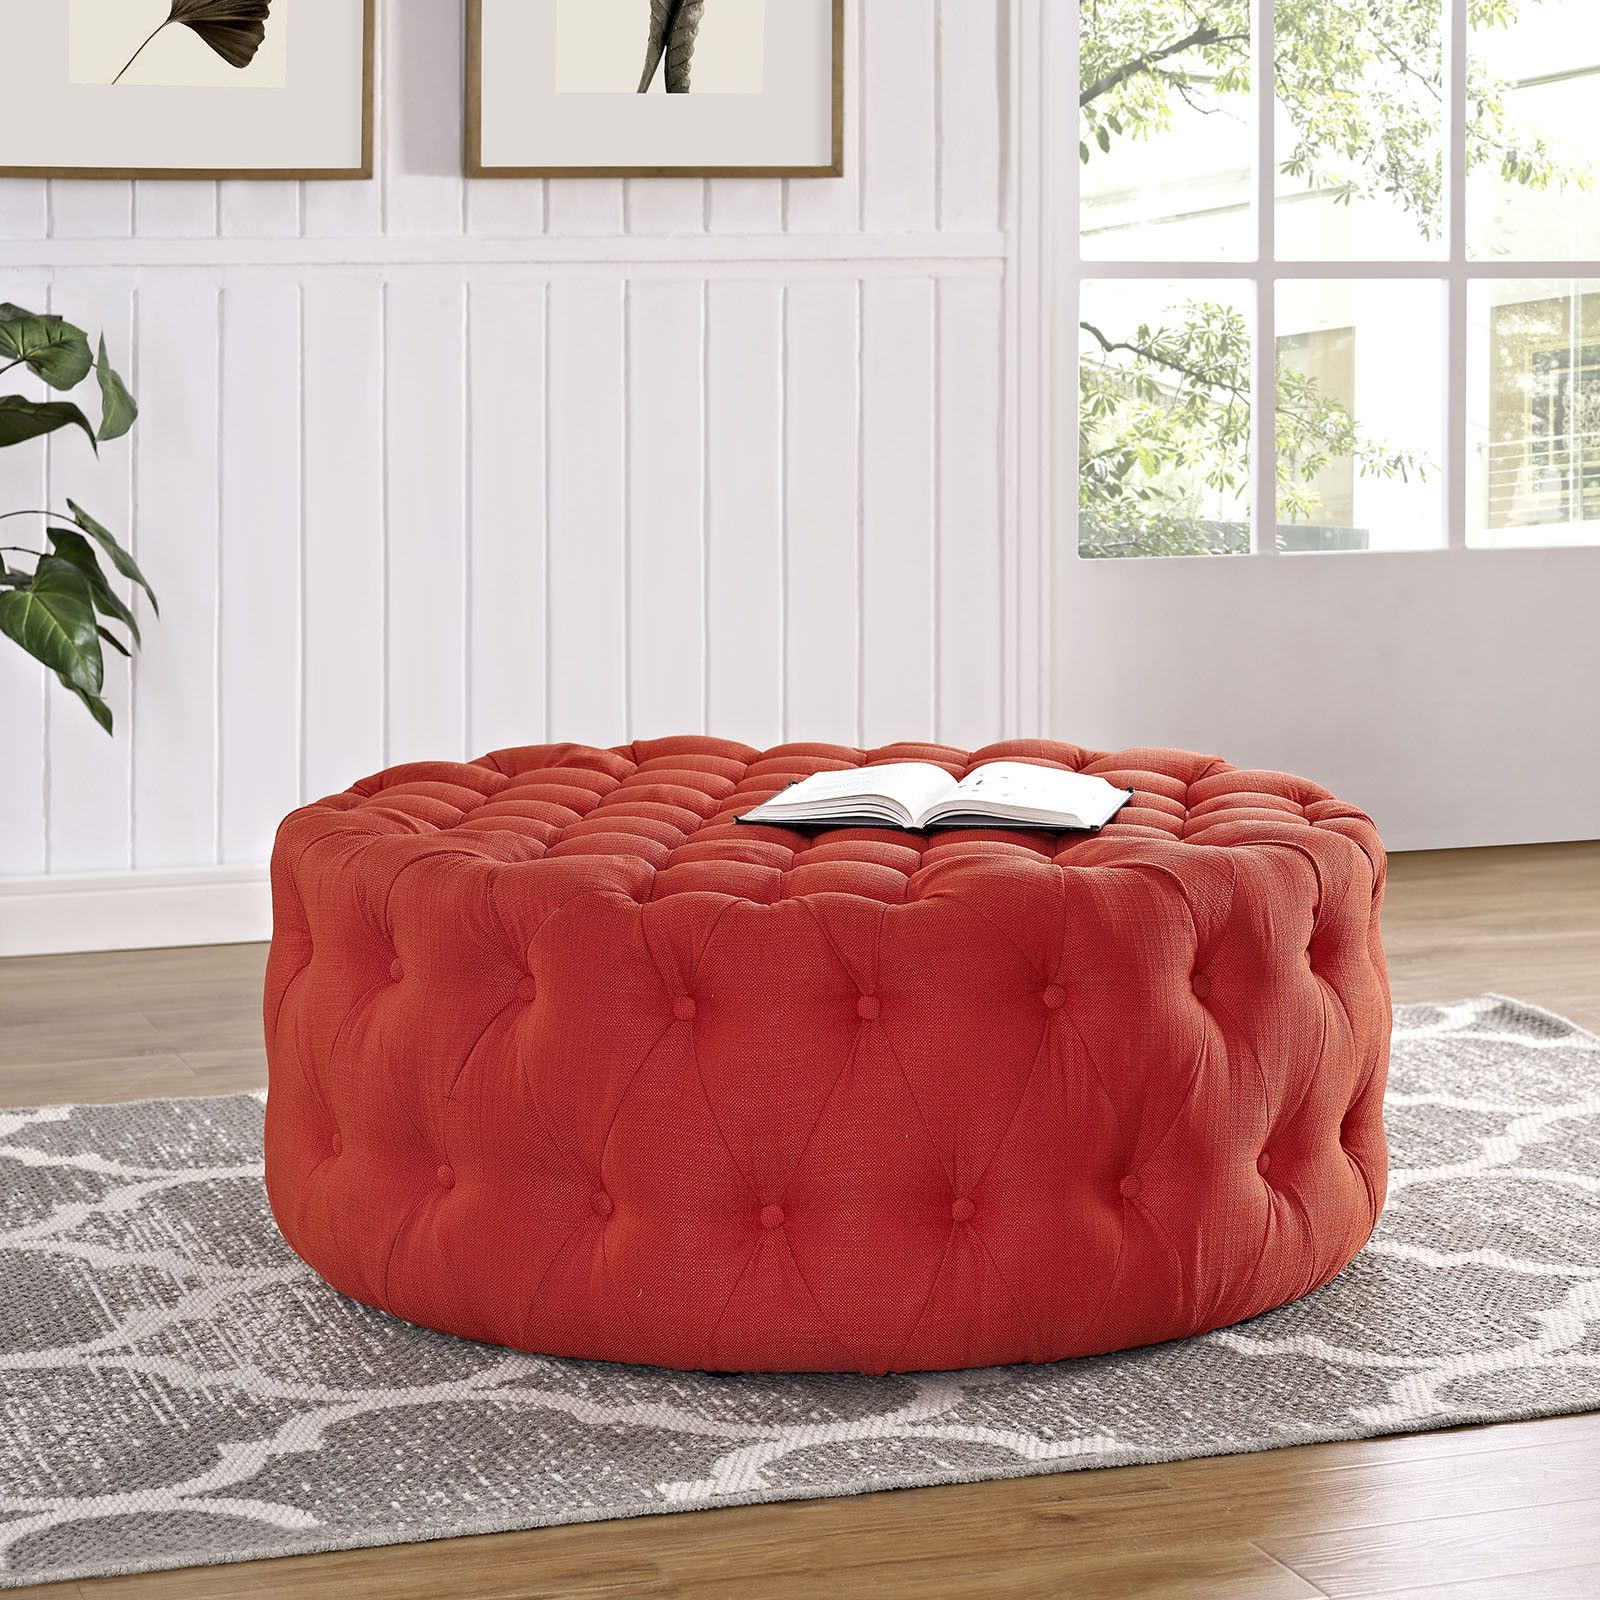 Button Tufted Fabric Upholstered Round Ottoman In Atomic Red Throughout 2019 Black Fabric Ottomans With Fringe Trim (View 6 of 10)